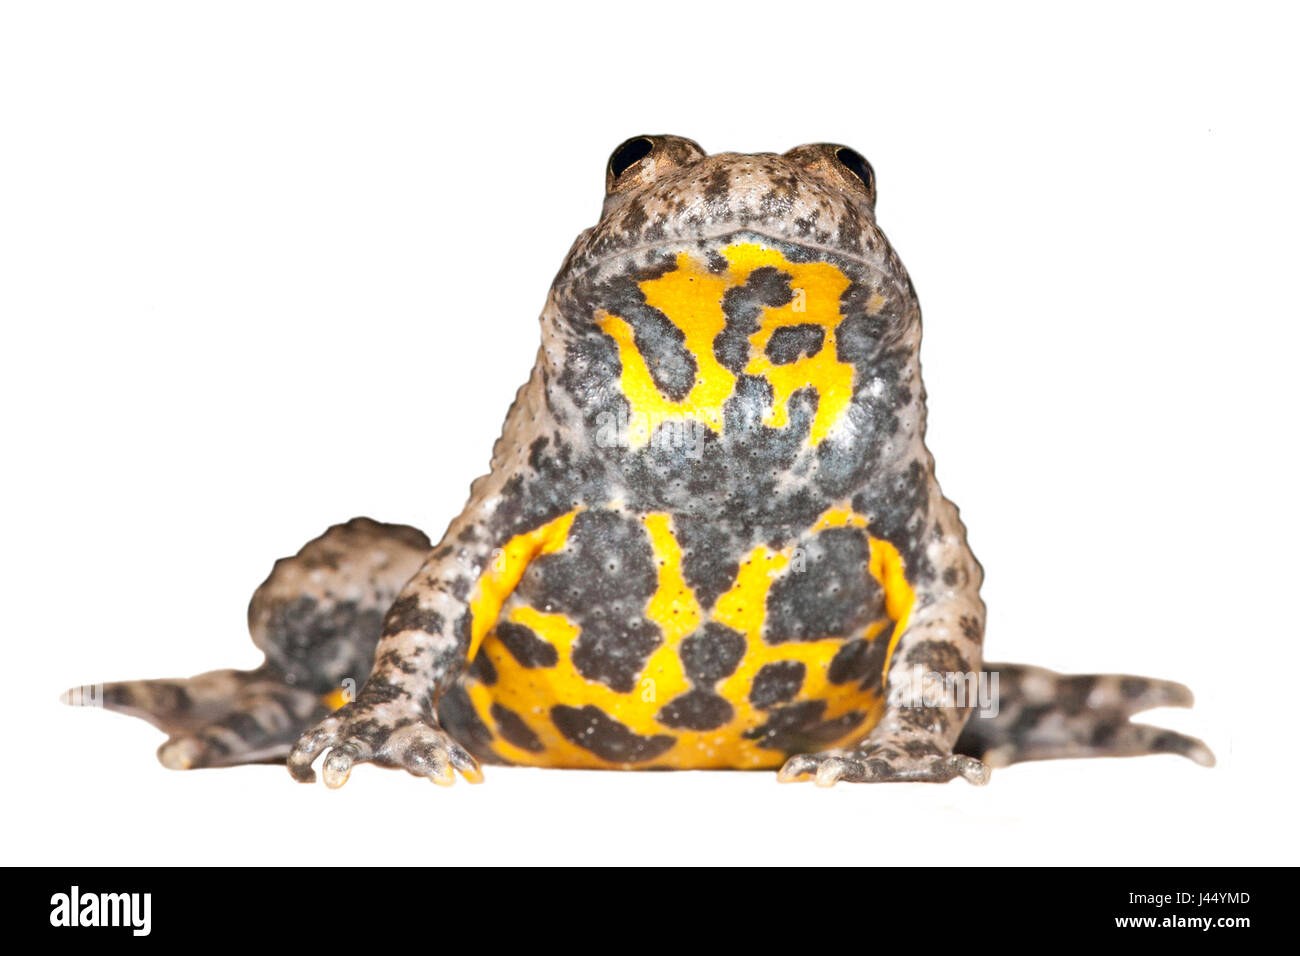 Yellow-bellied toad contre fond blanc (rendu) Banque D'Images